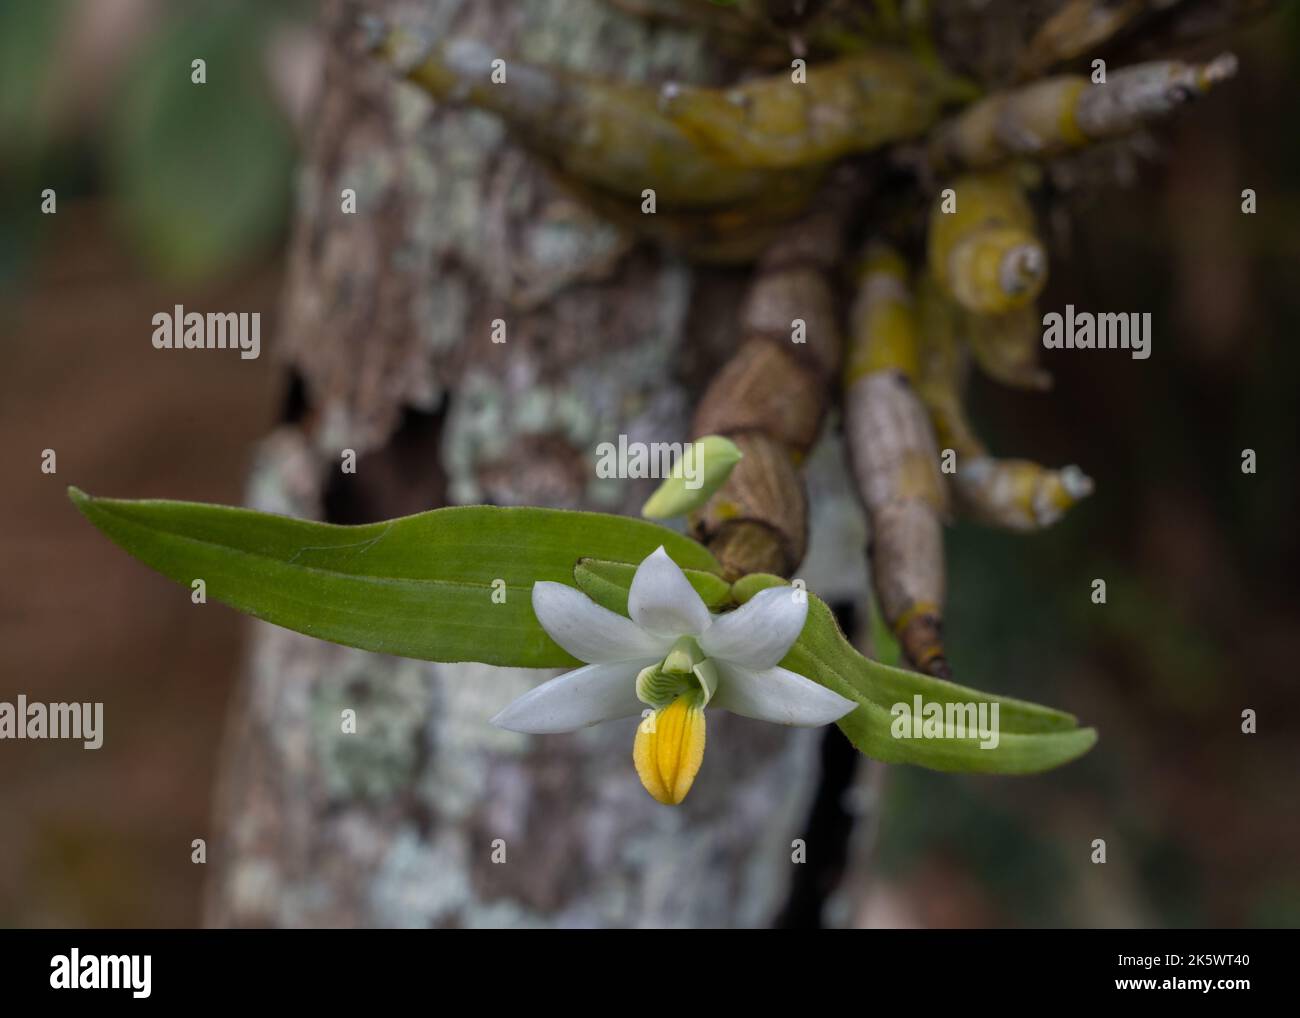 Closeup view of delicate white green and yellow flower of dendrobium scabrilingue epiphytic orchid species blooming outdoors on natural background Stock Photo